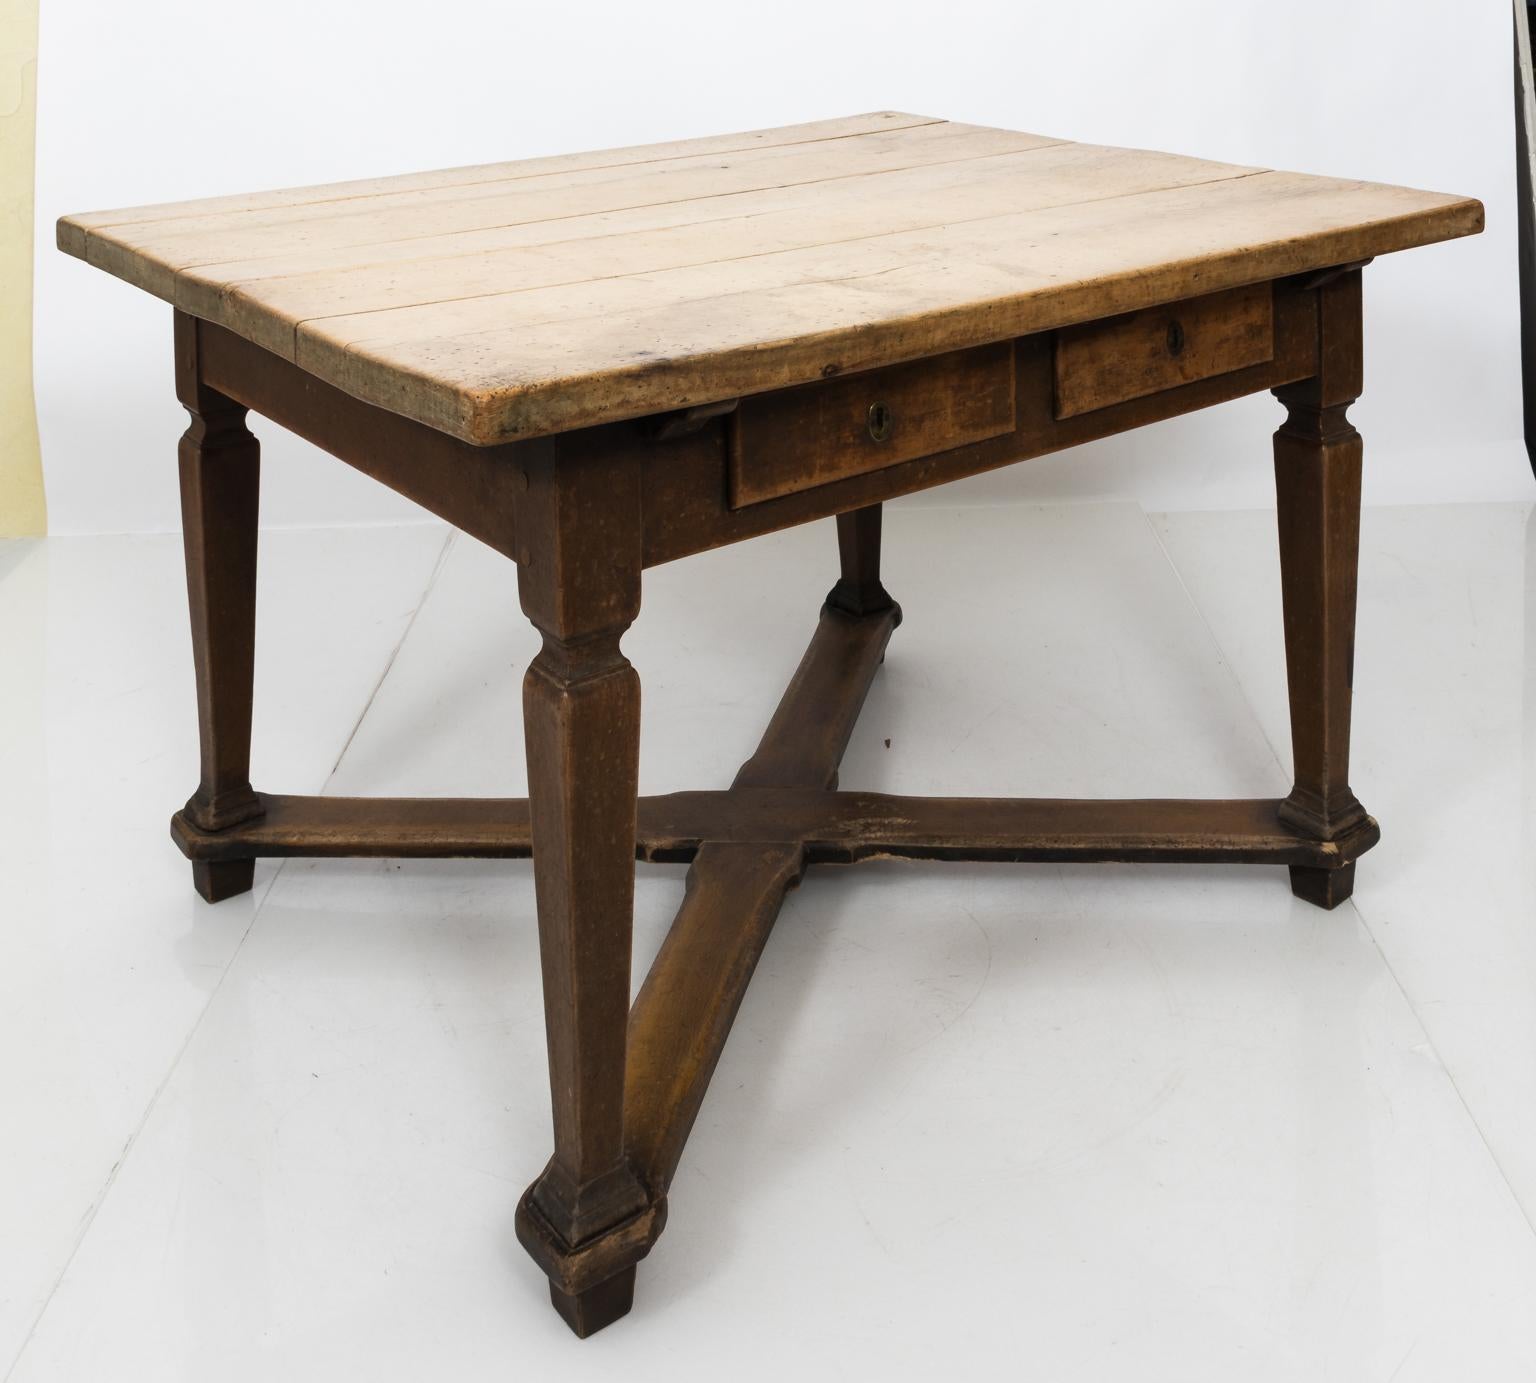 19th century antique Scandinavian farm table with two drawers. Please note of wear consistent with age including an unstable tabletop due to a loose joinery on the corner.
  